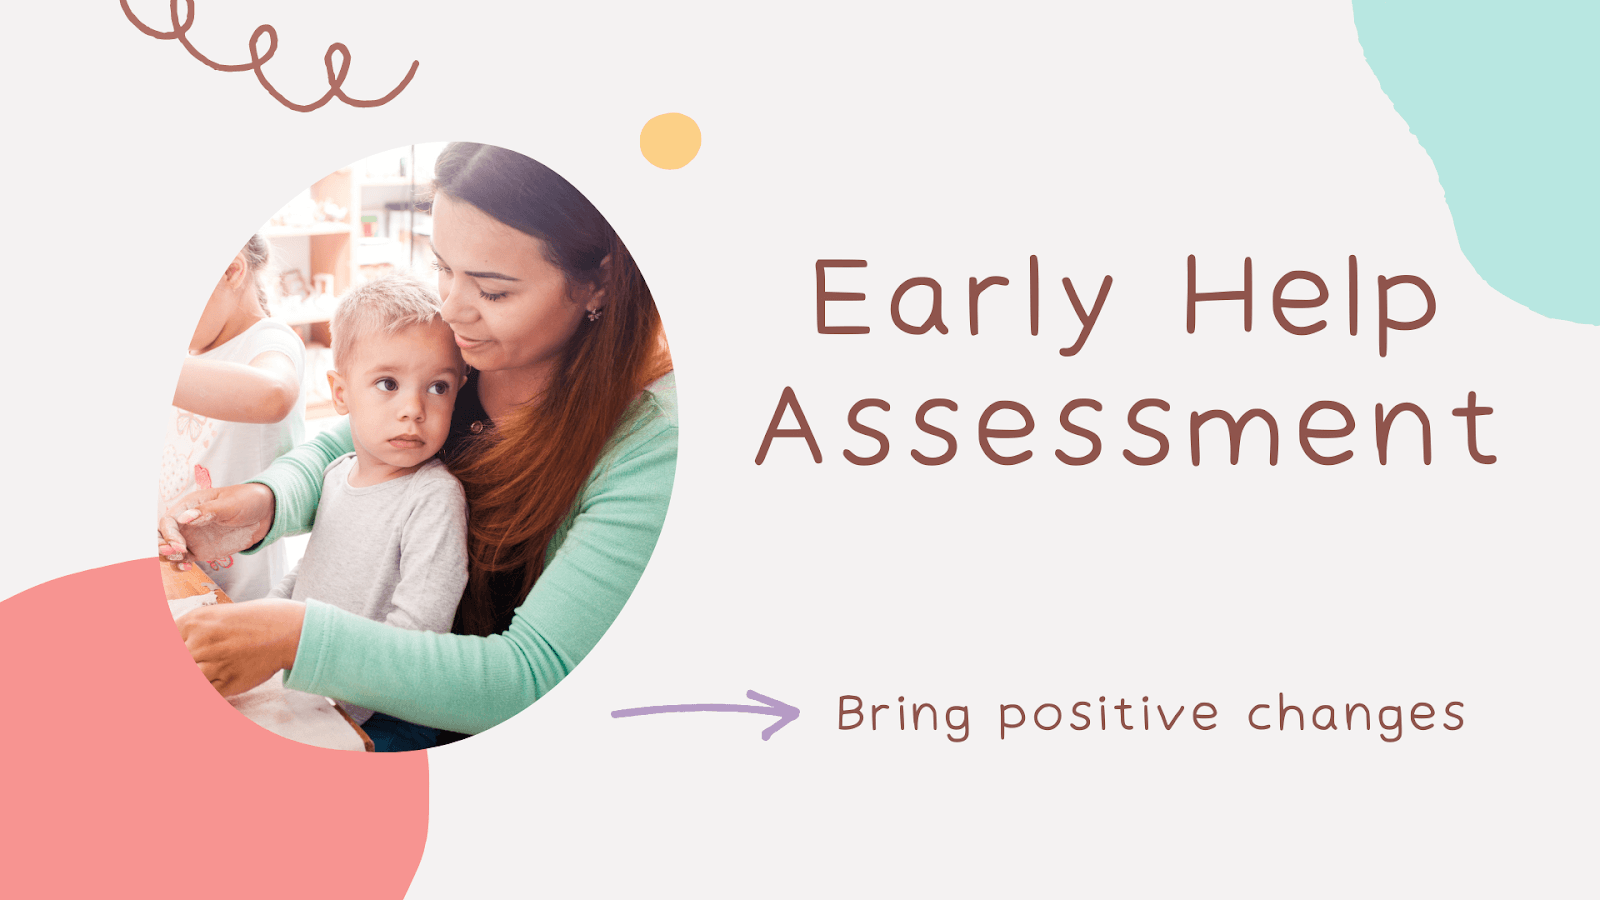 What is an Early Help Assessment